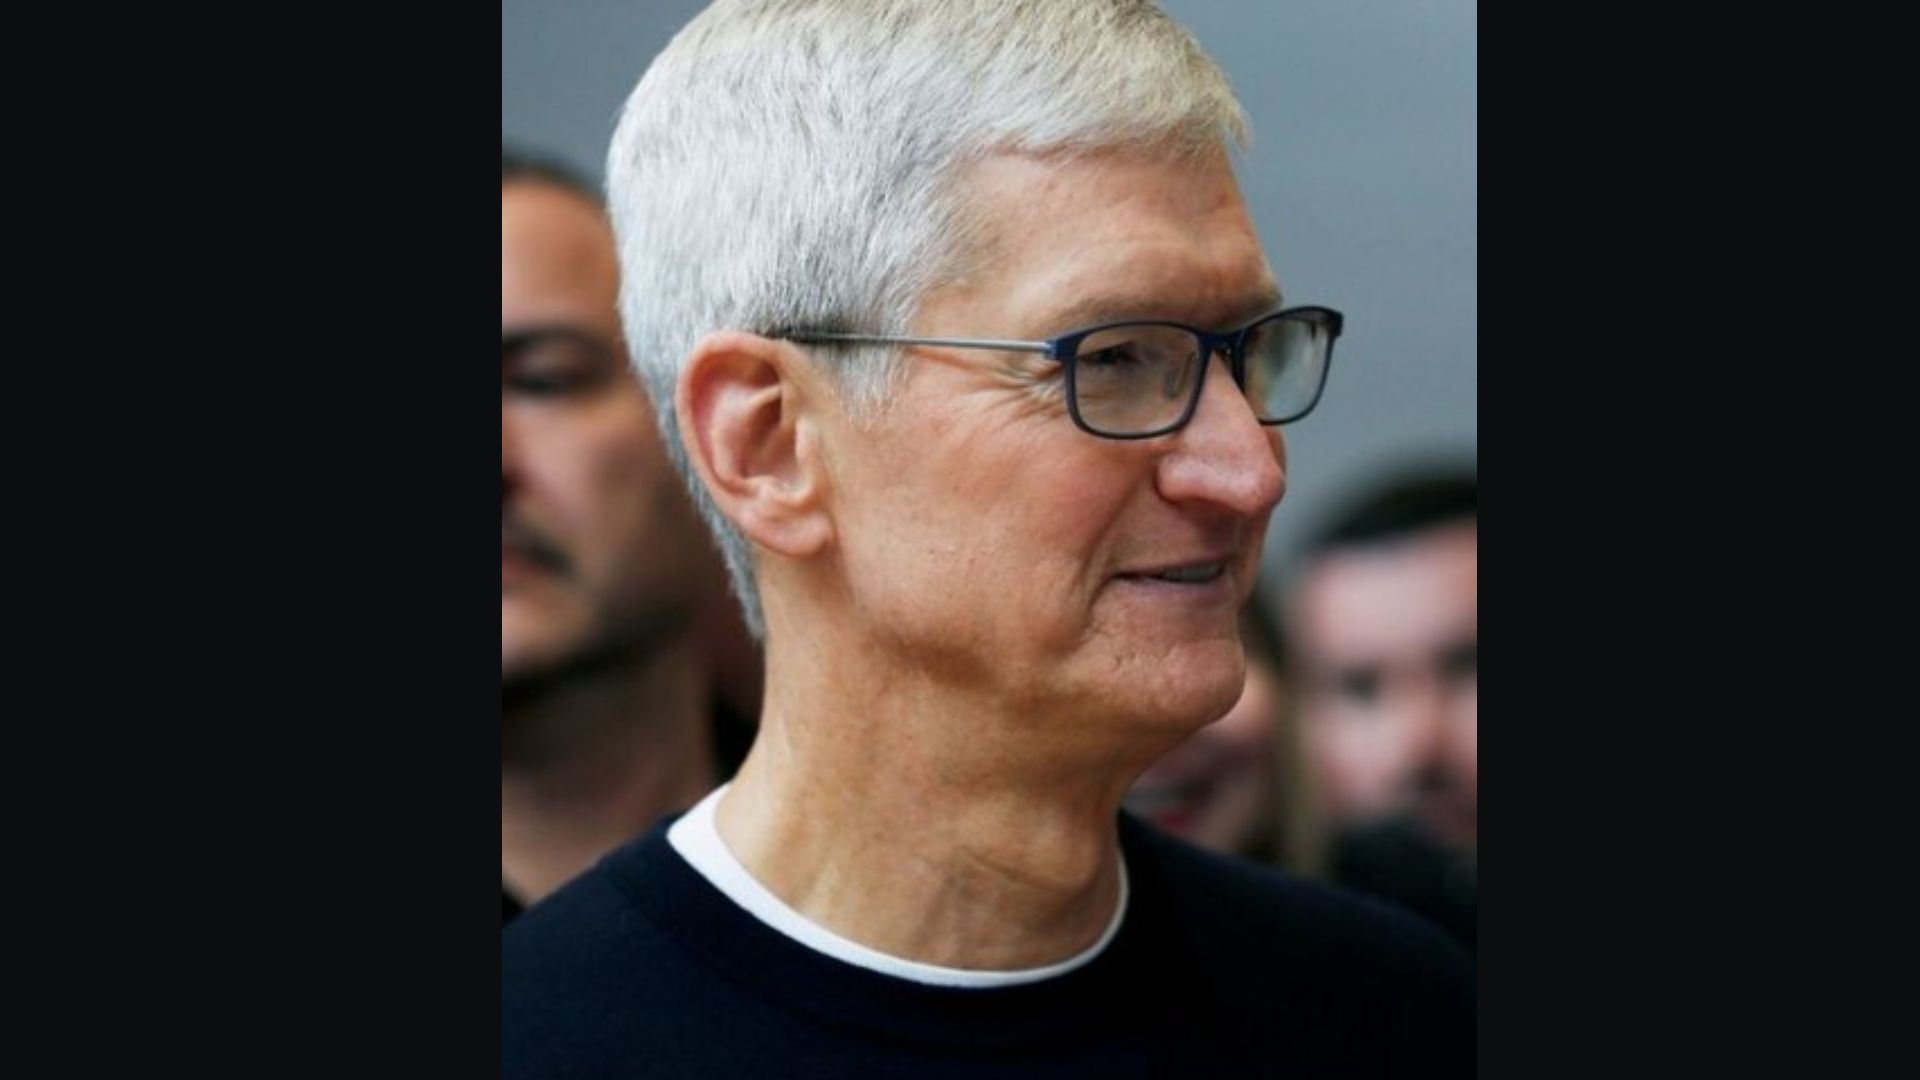 ‘We Grew Strong Double-Digit’ CEO Tim Cook Is Happy For Apple’s Market Growth In India